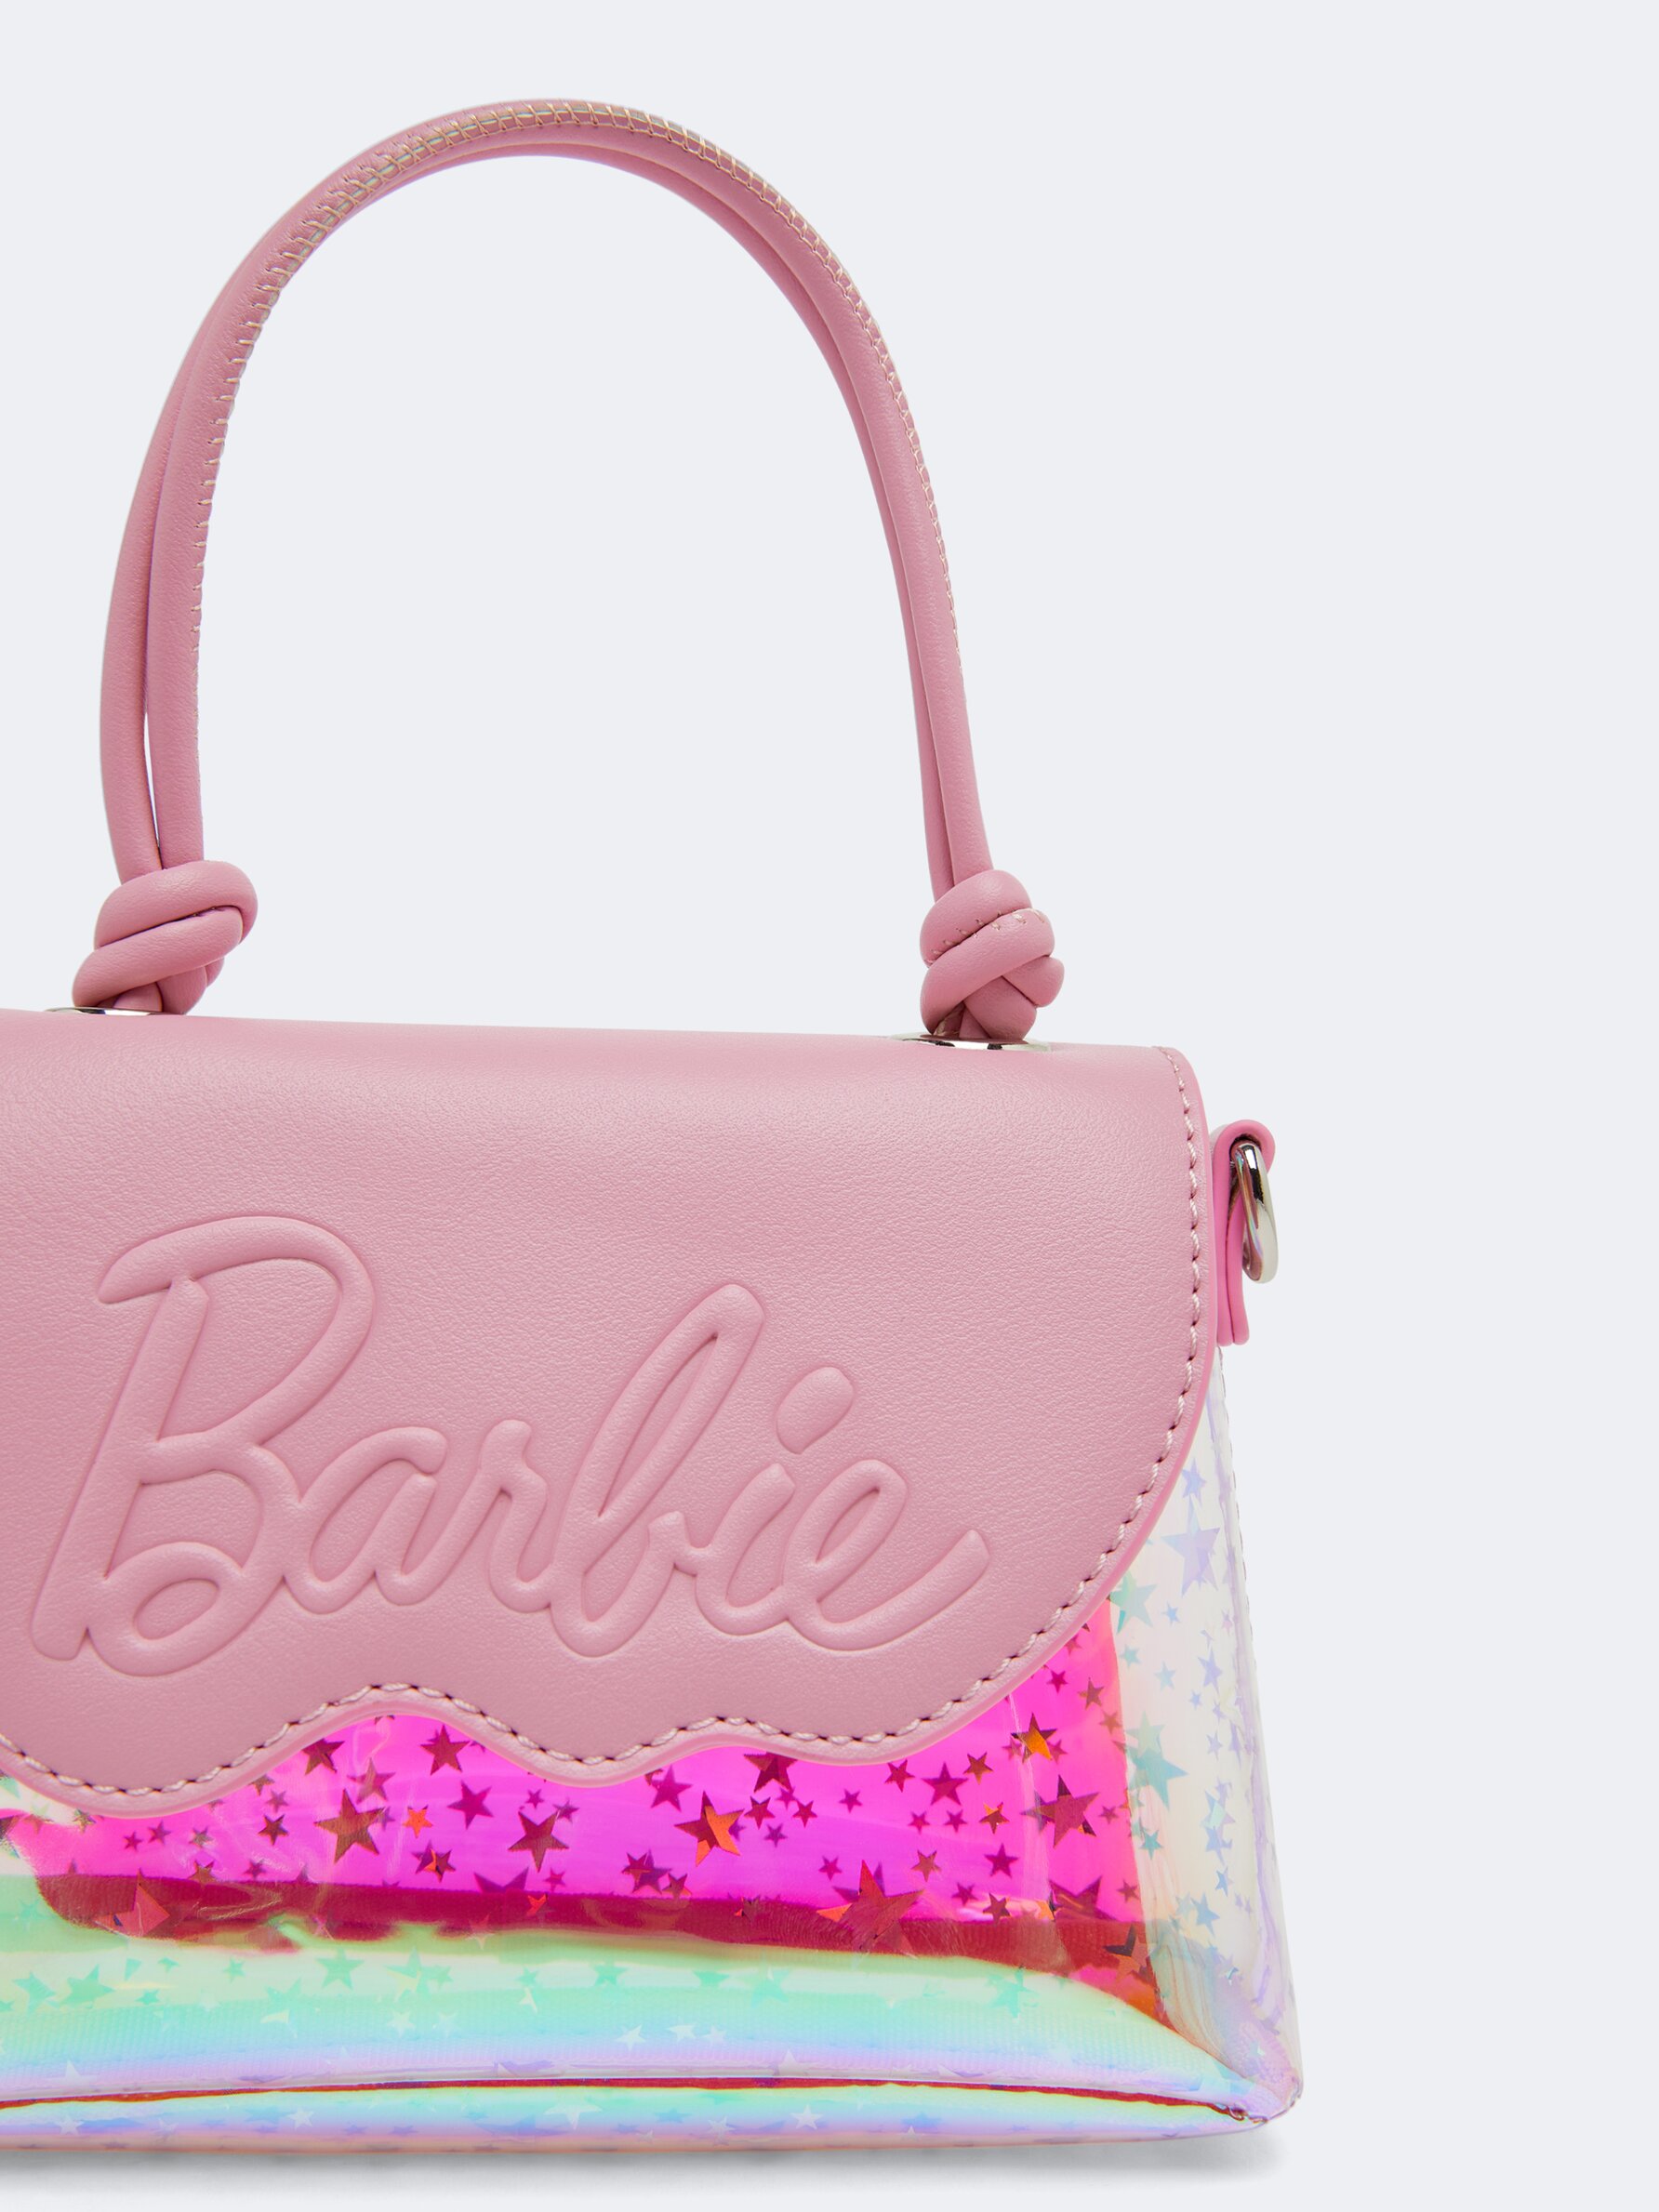 Leather Doll Accessories Handbag | Doll Bags Accessories Barbie - Leather  Bag Barbie - Aliexpress